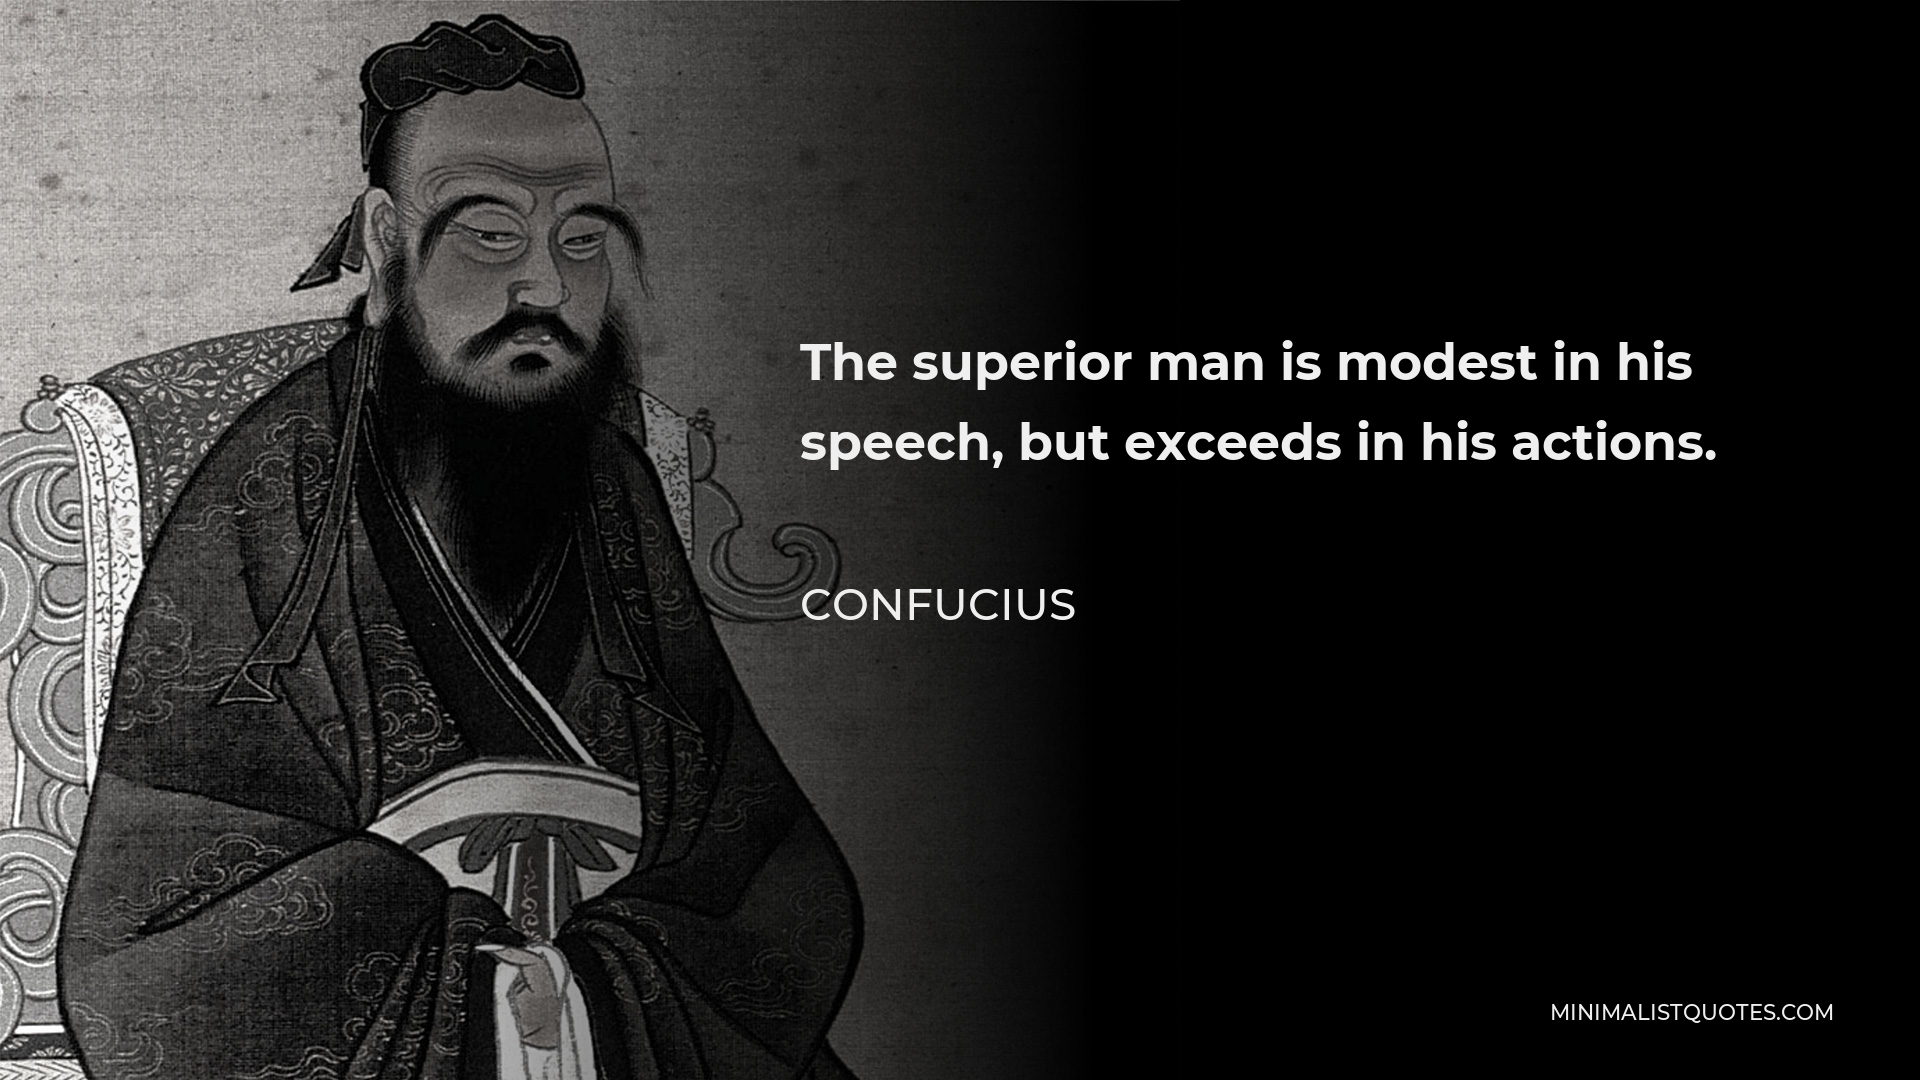 Confucius Quote - The superior man is modest in his speech, but exceeds in his actions.